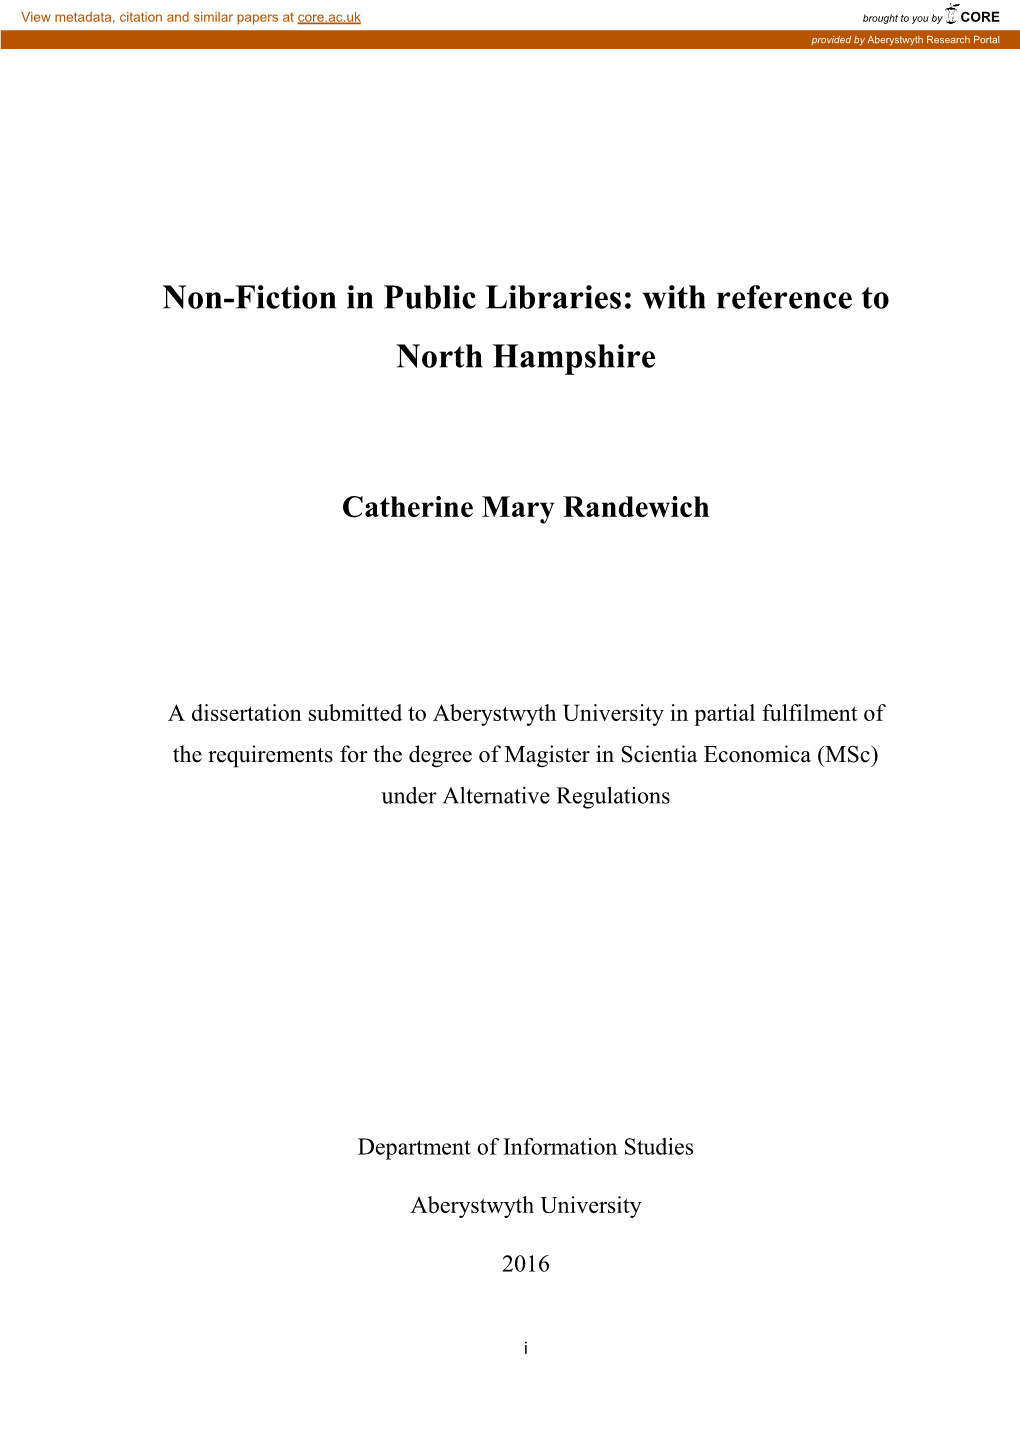 Non-Fiction in Public Libraries: with Reference to North Hampshire